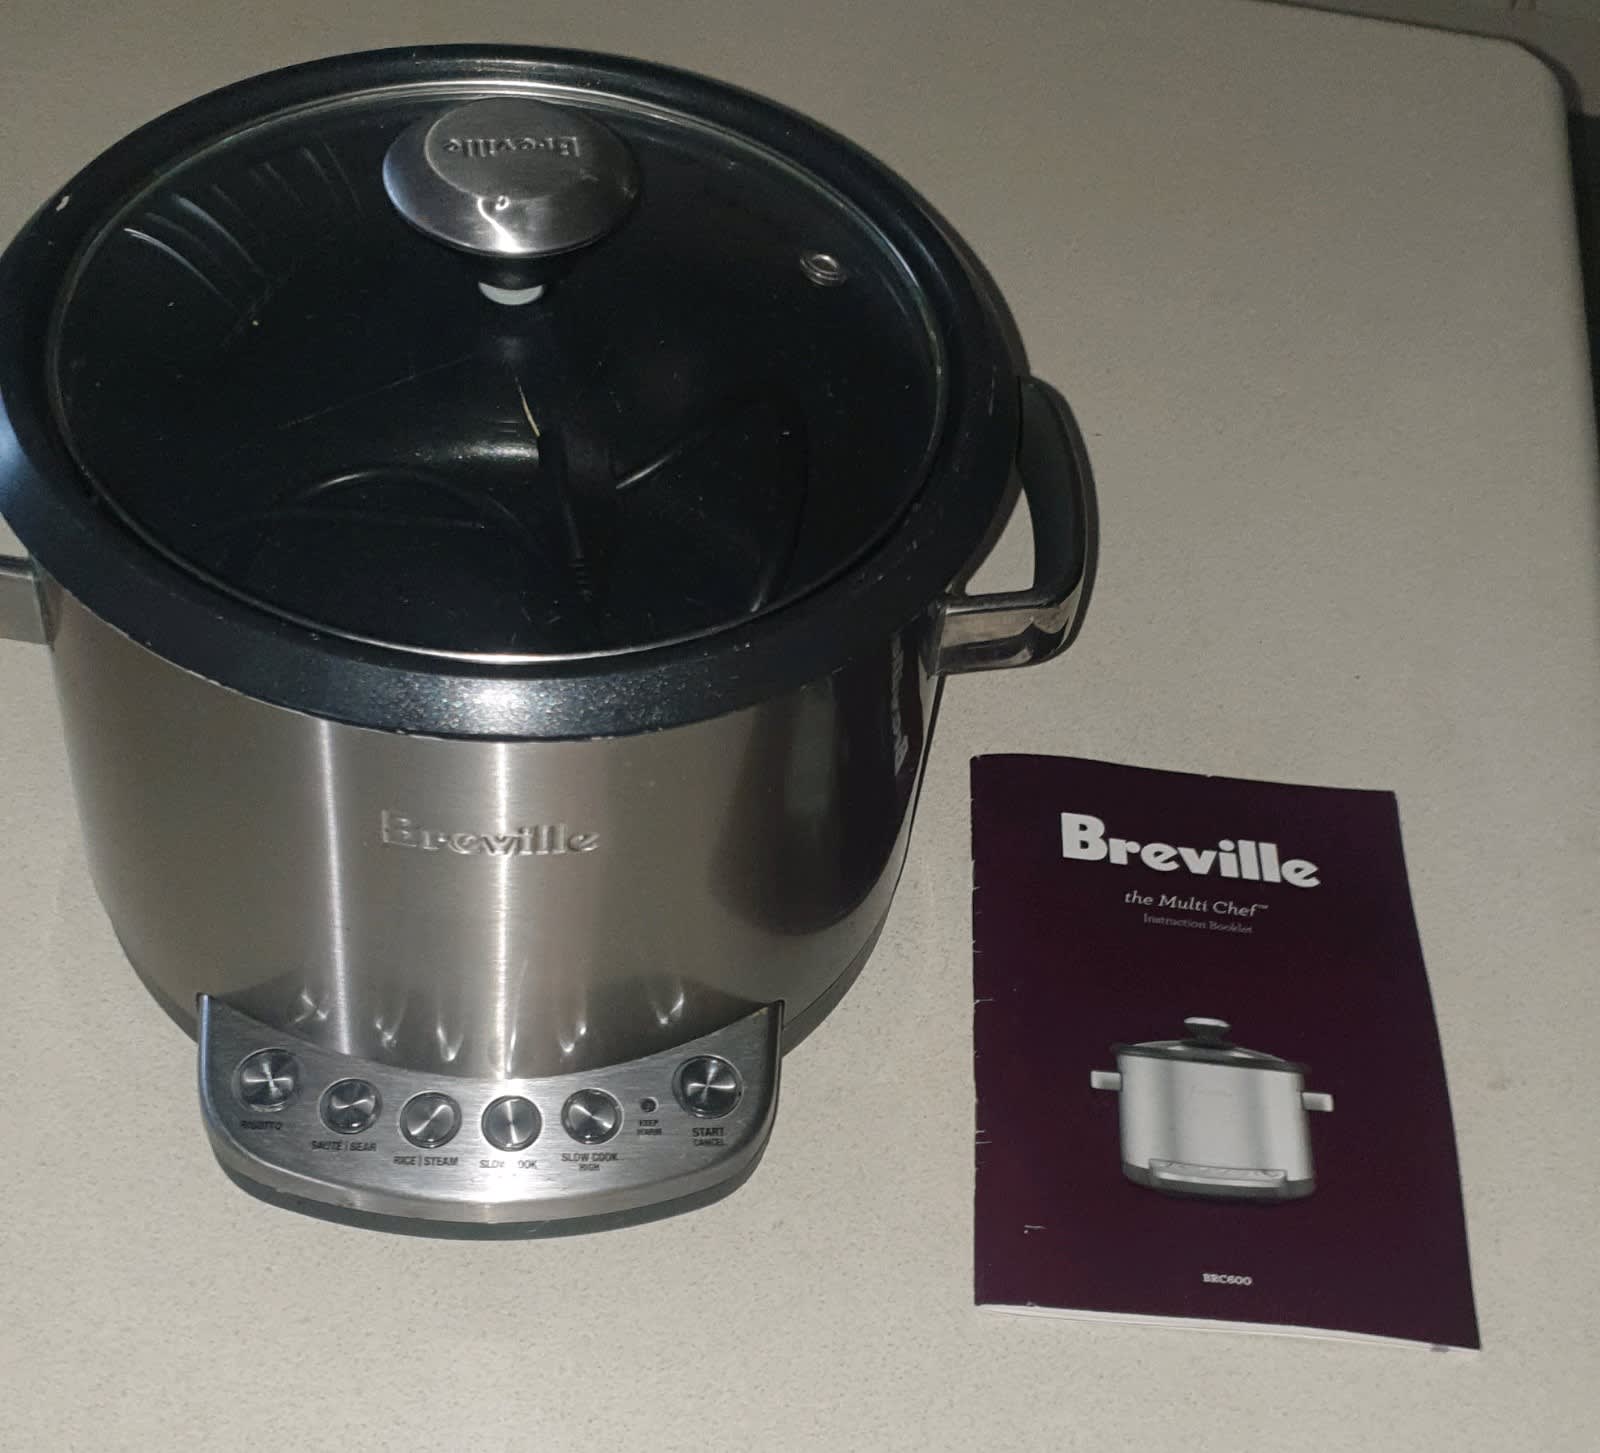 Breville the Searing Slow Cooker LSC650BSS - Consumer NZ